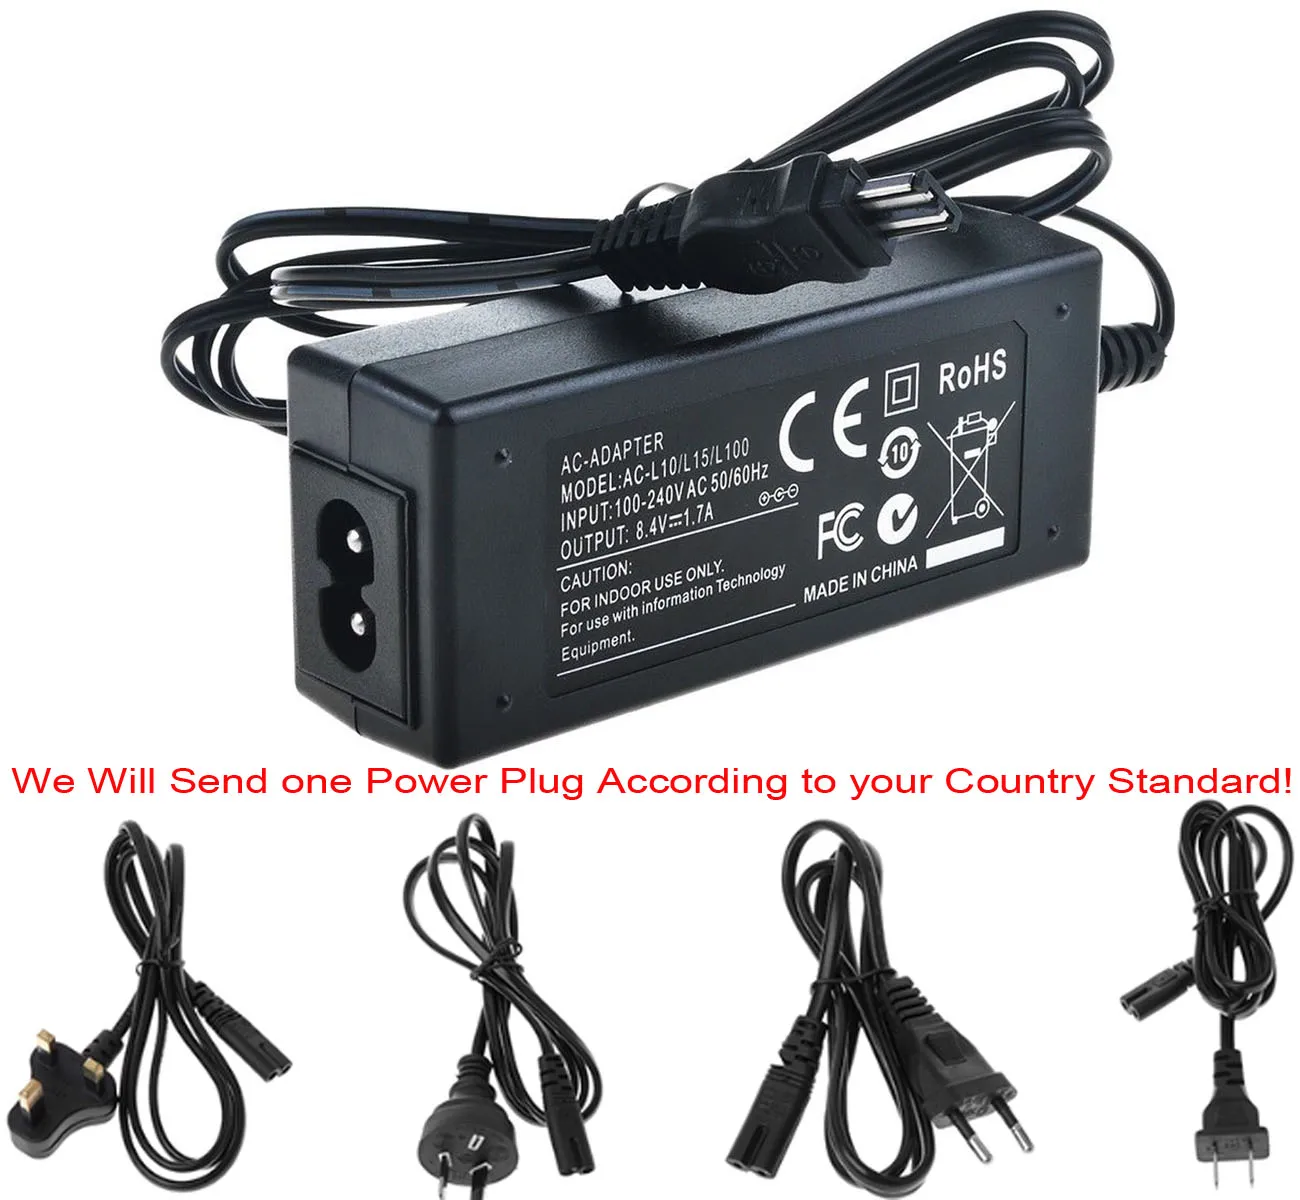 AC Adapter Charger for Sony DCR-DVD91 DCR-DVD100 DCR-DVD101 DCR-DVD200 DCR-DVD201 DCR-DVD300 DCR-DVD301 Handycam Camcorder | Электроника